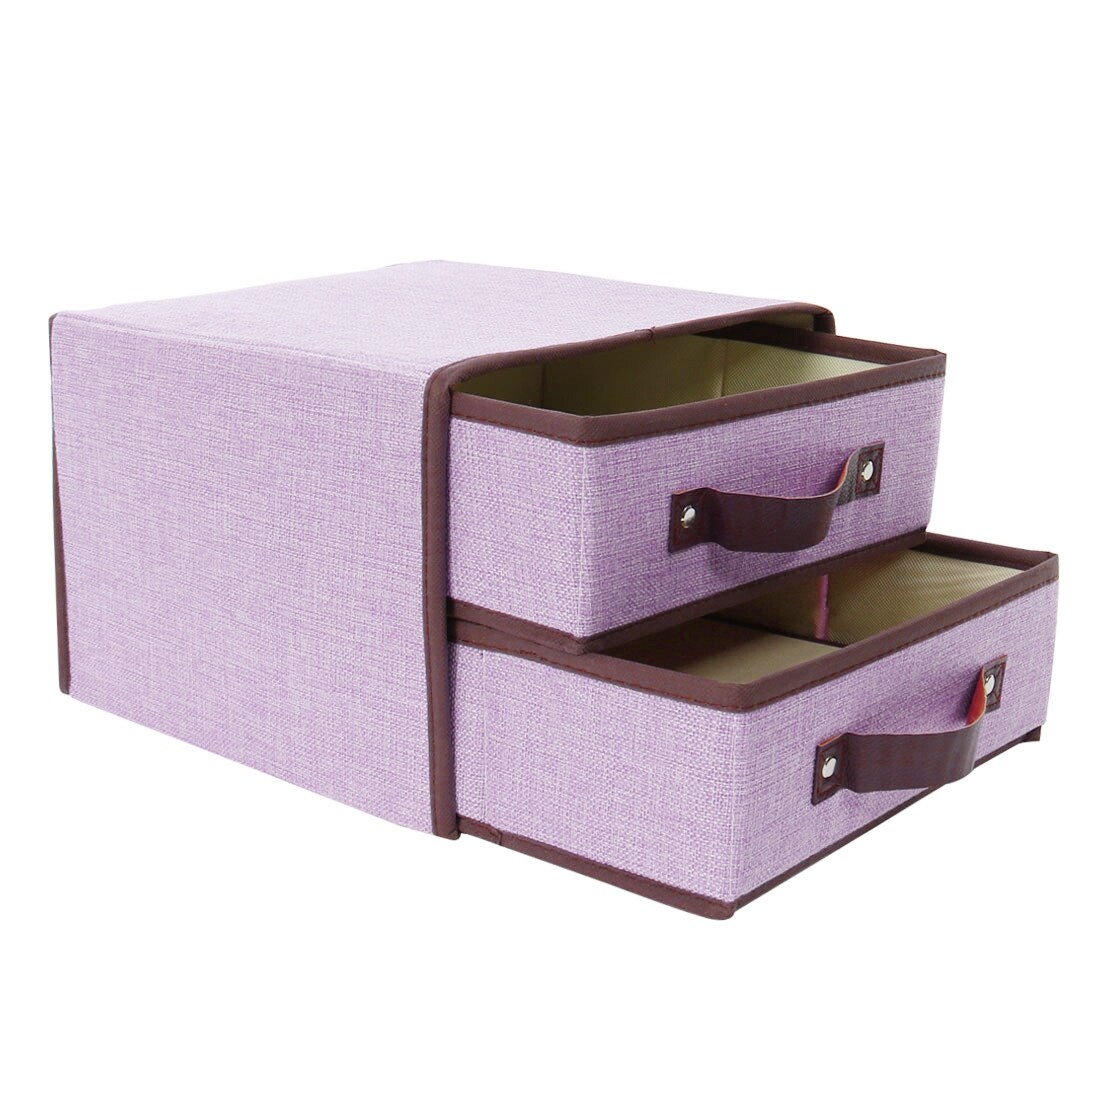 2 Pack of Modern Storage Boxes organizer multi purpose drawer foldable Container 